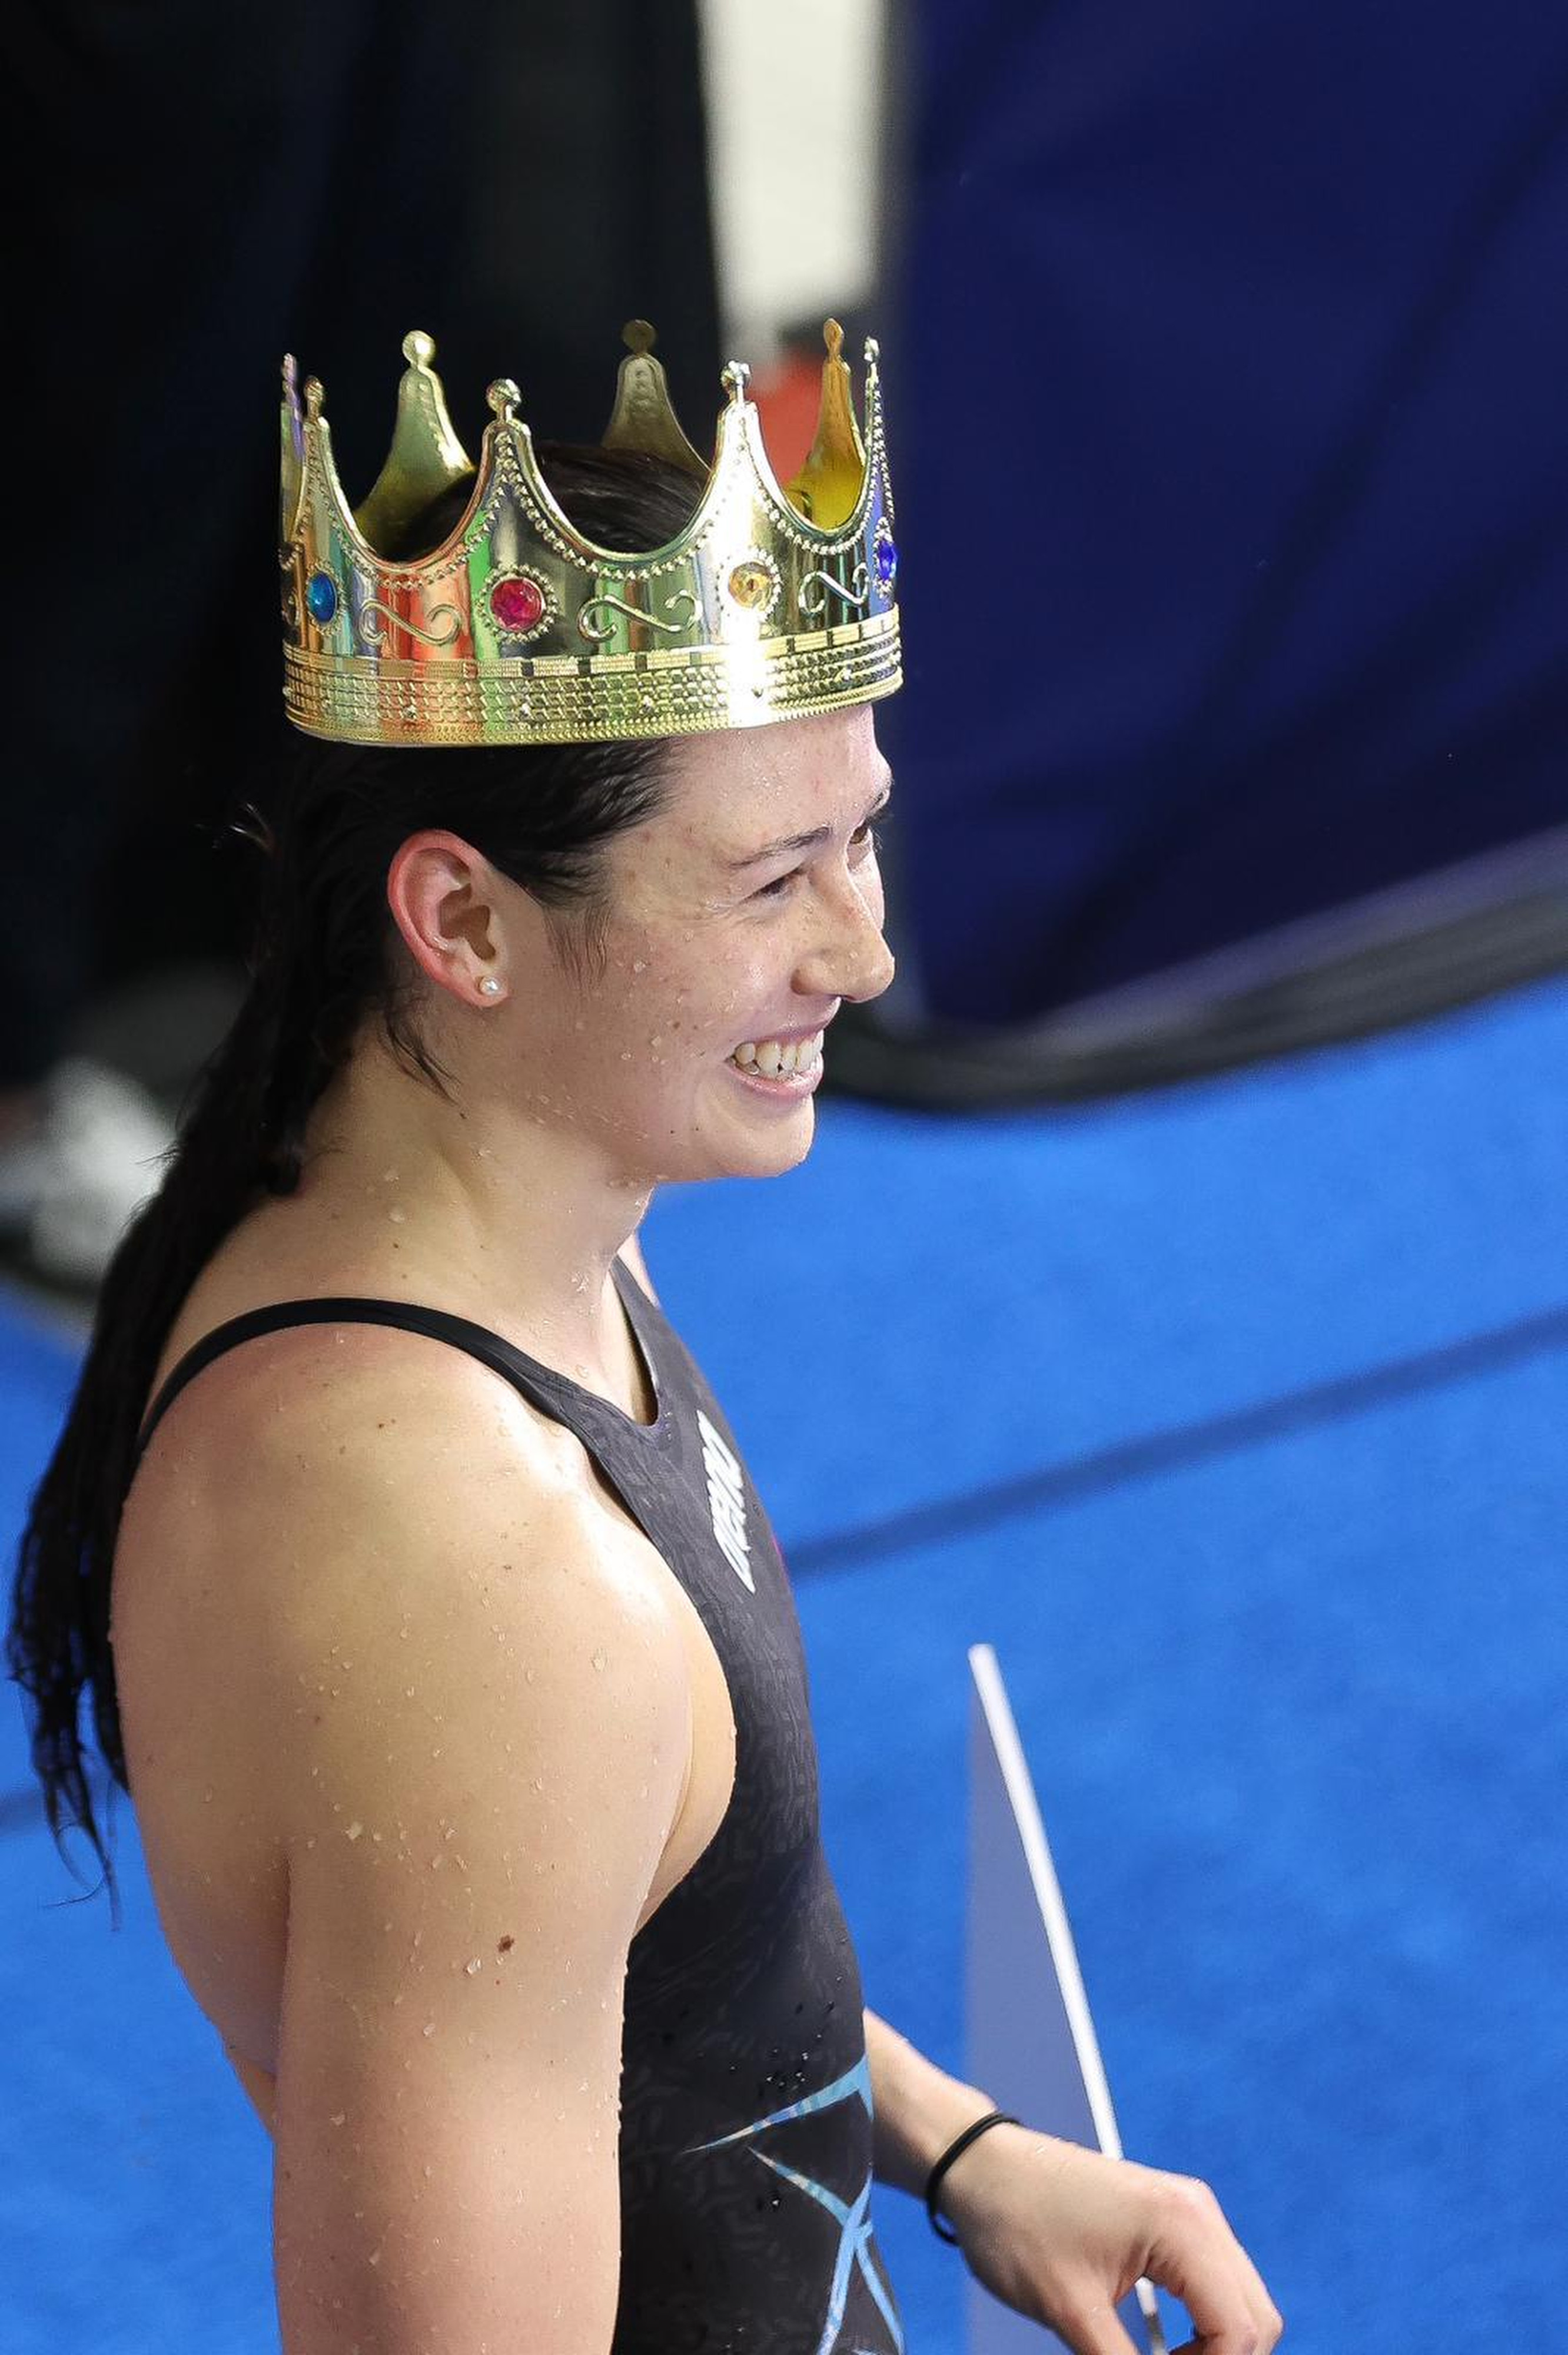 Siobhan Haughey earned the 100m freestyle ‘triple crown’ at the Fina World Cup meet in the US. Photo: Handout